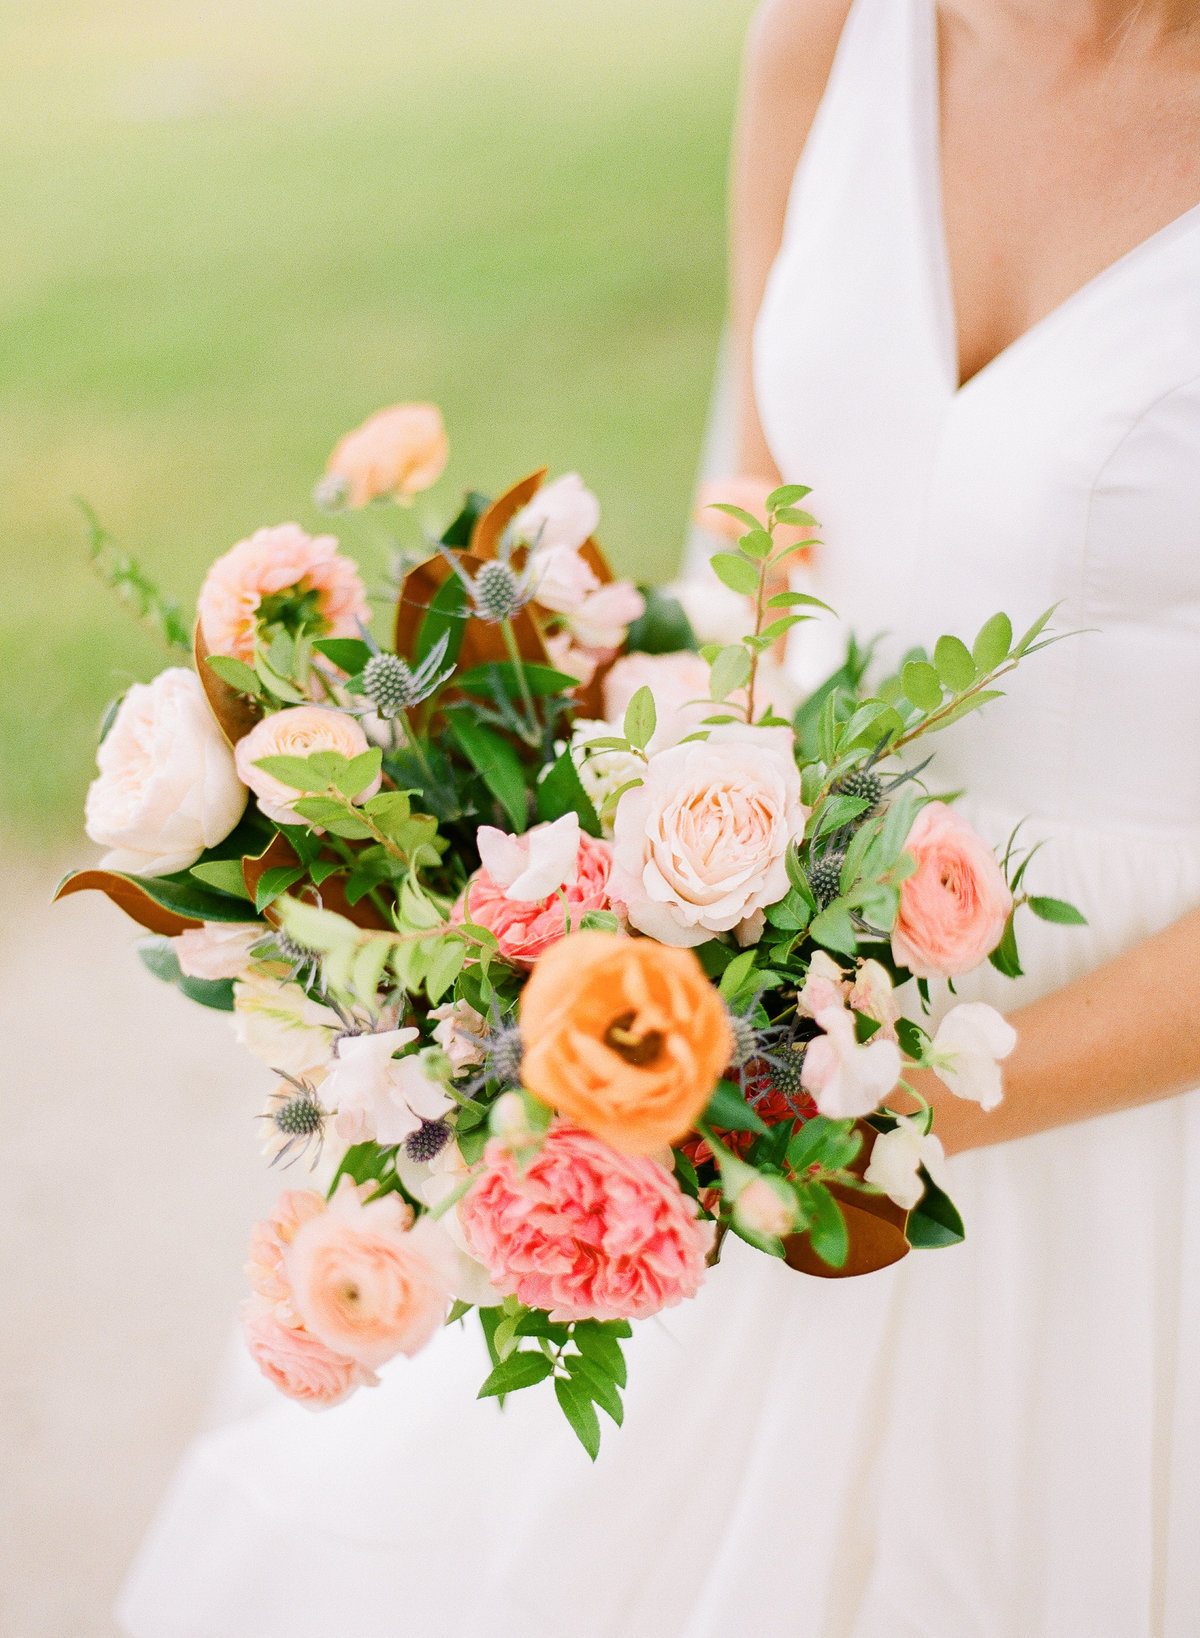 Colorful Bridal Bouquet from Branch Design Studio for October Charleston Wedding